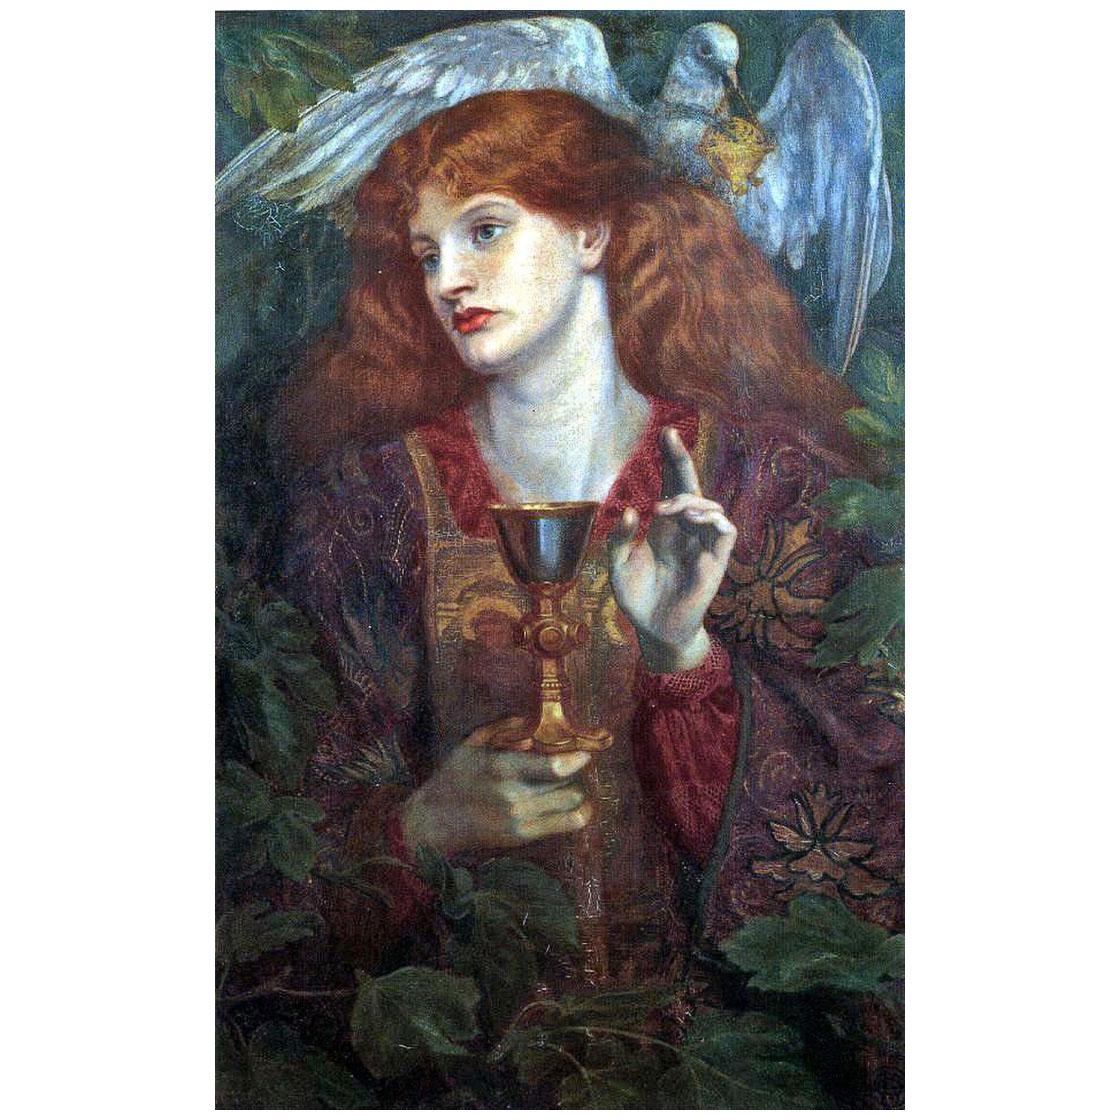 Dante Gabriel Rossetti. The Damsel of the Holy Grail. 1874. Private collection